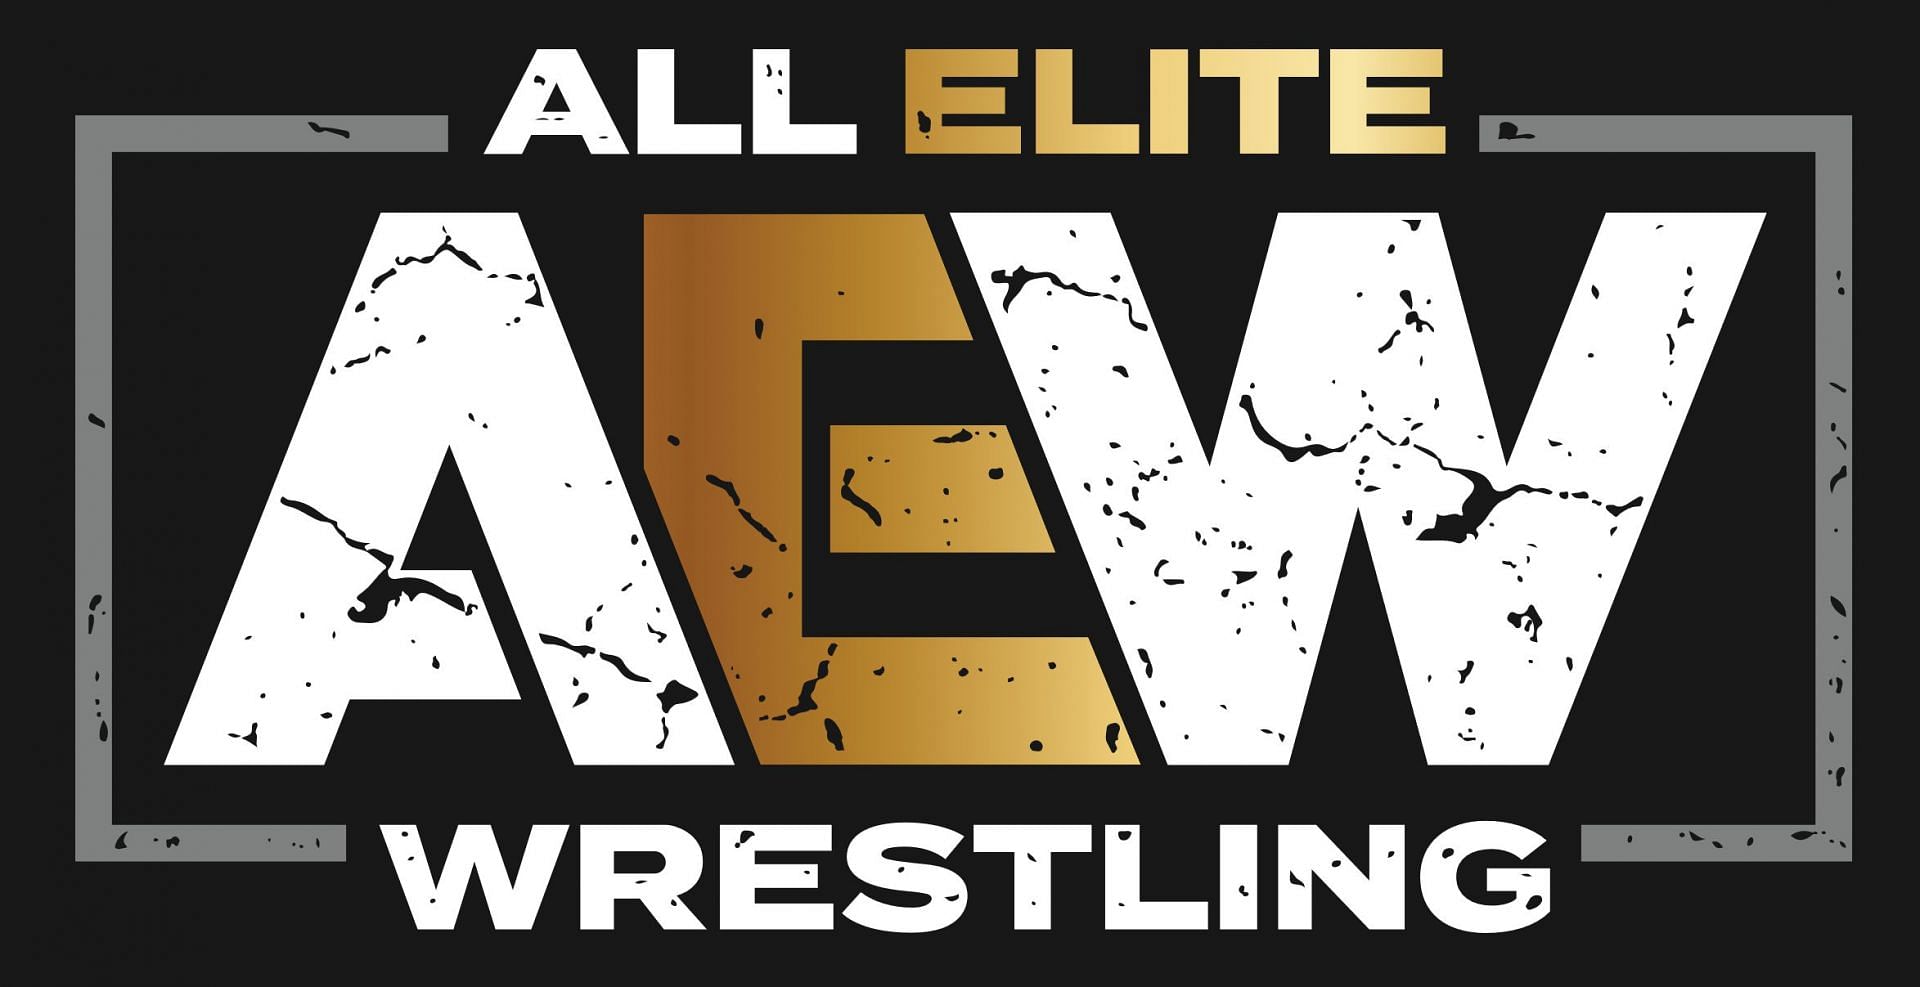 A former AEW star confirms current contract status